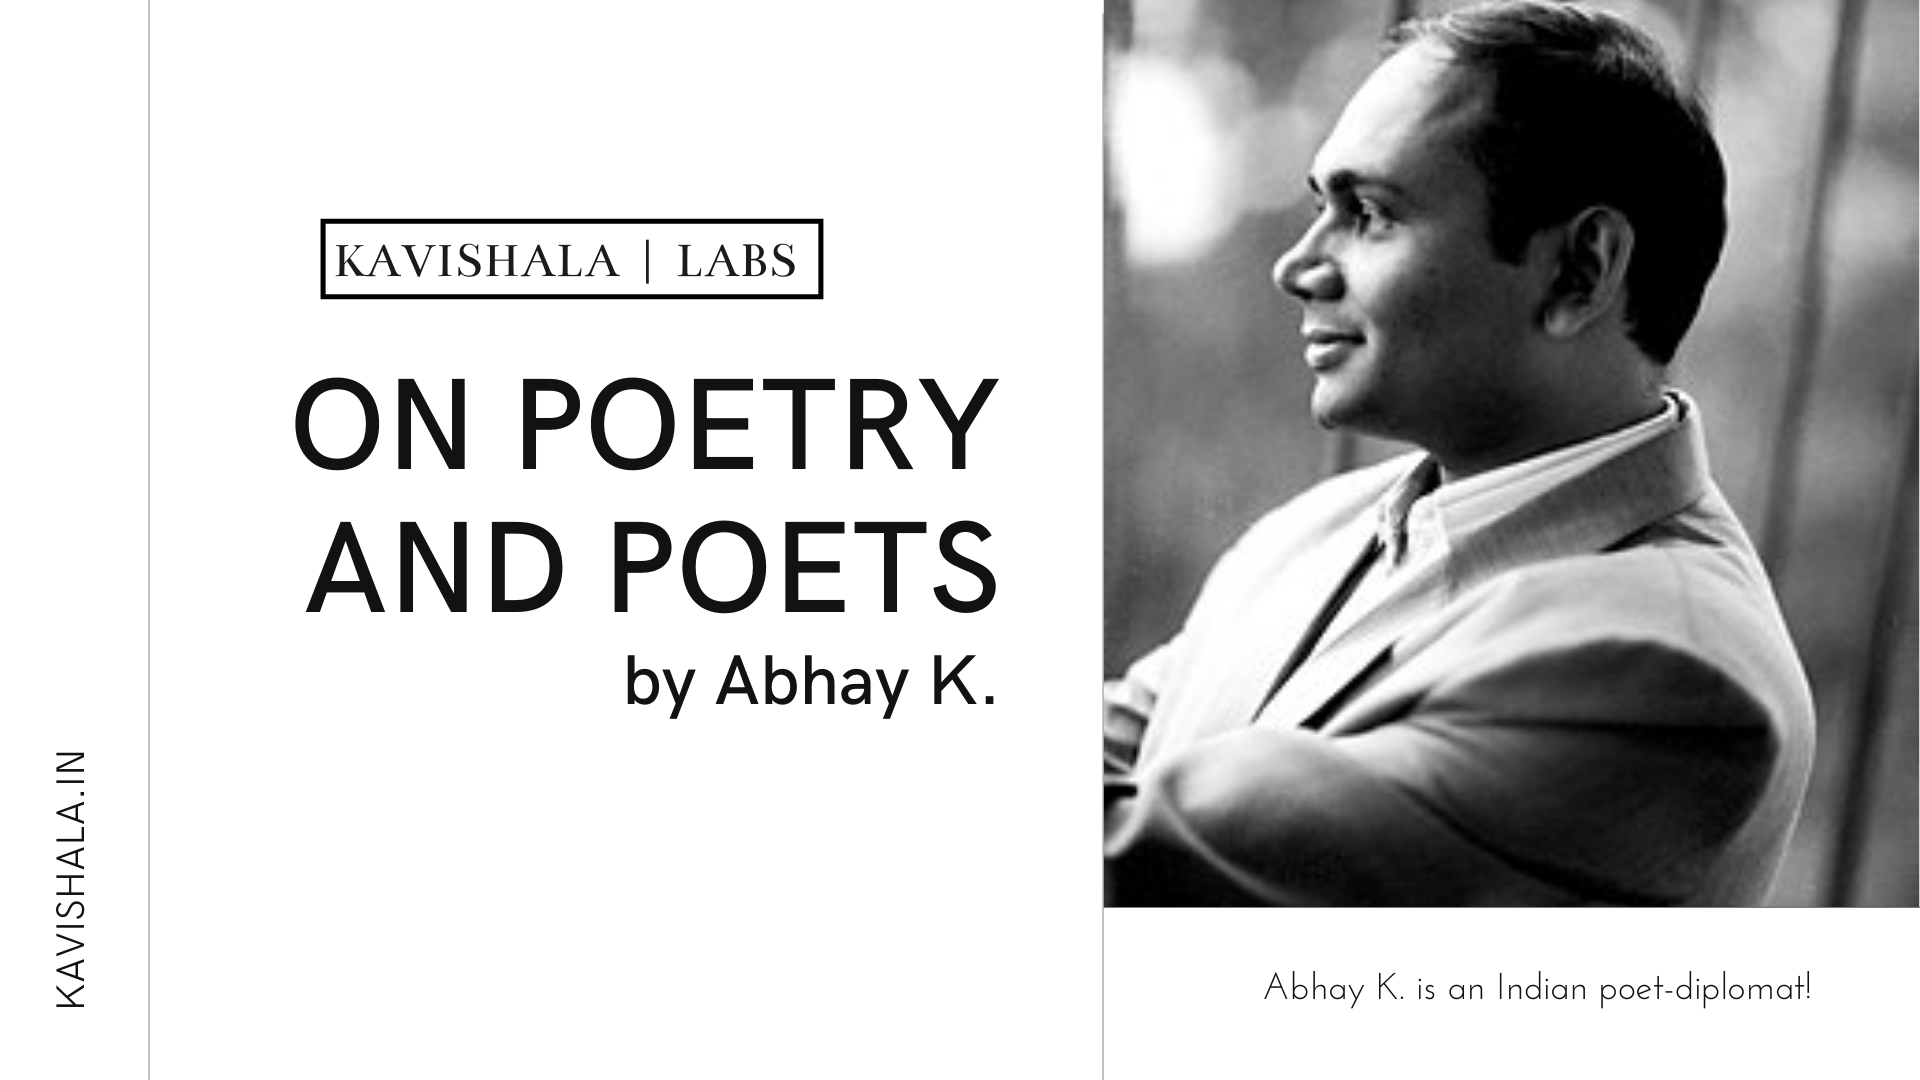 On Poetry & Poets by Abhay K.'s image